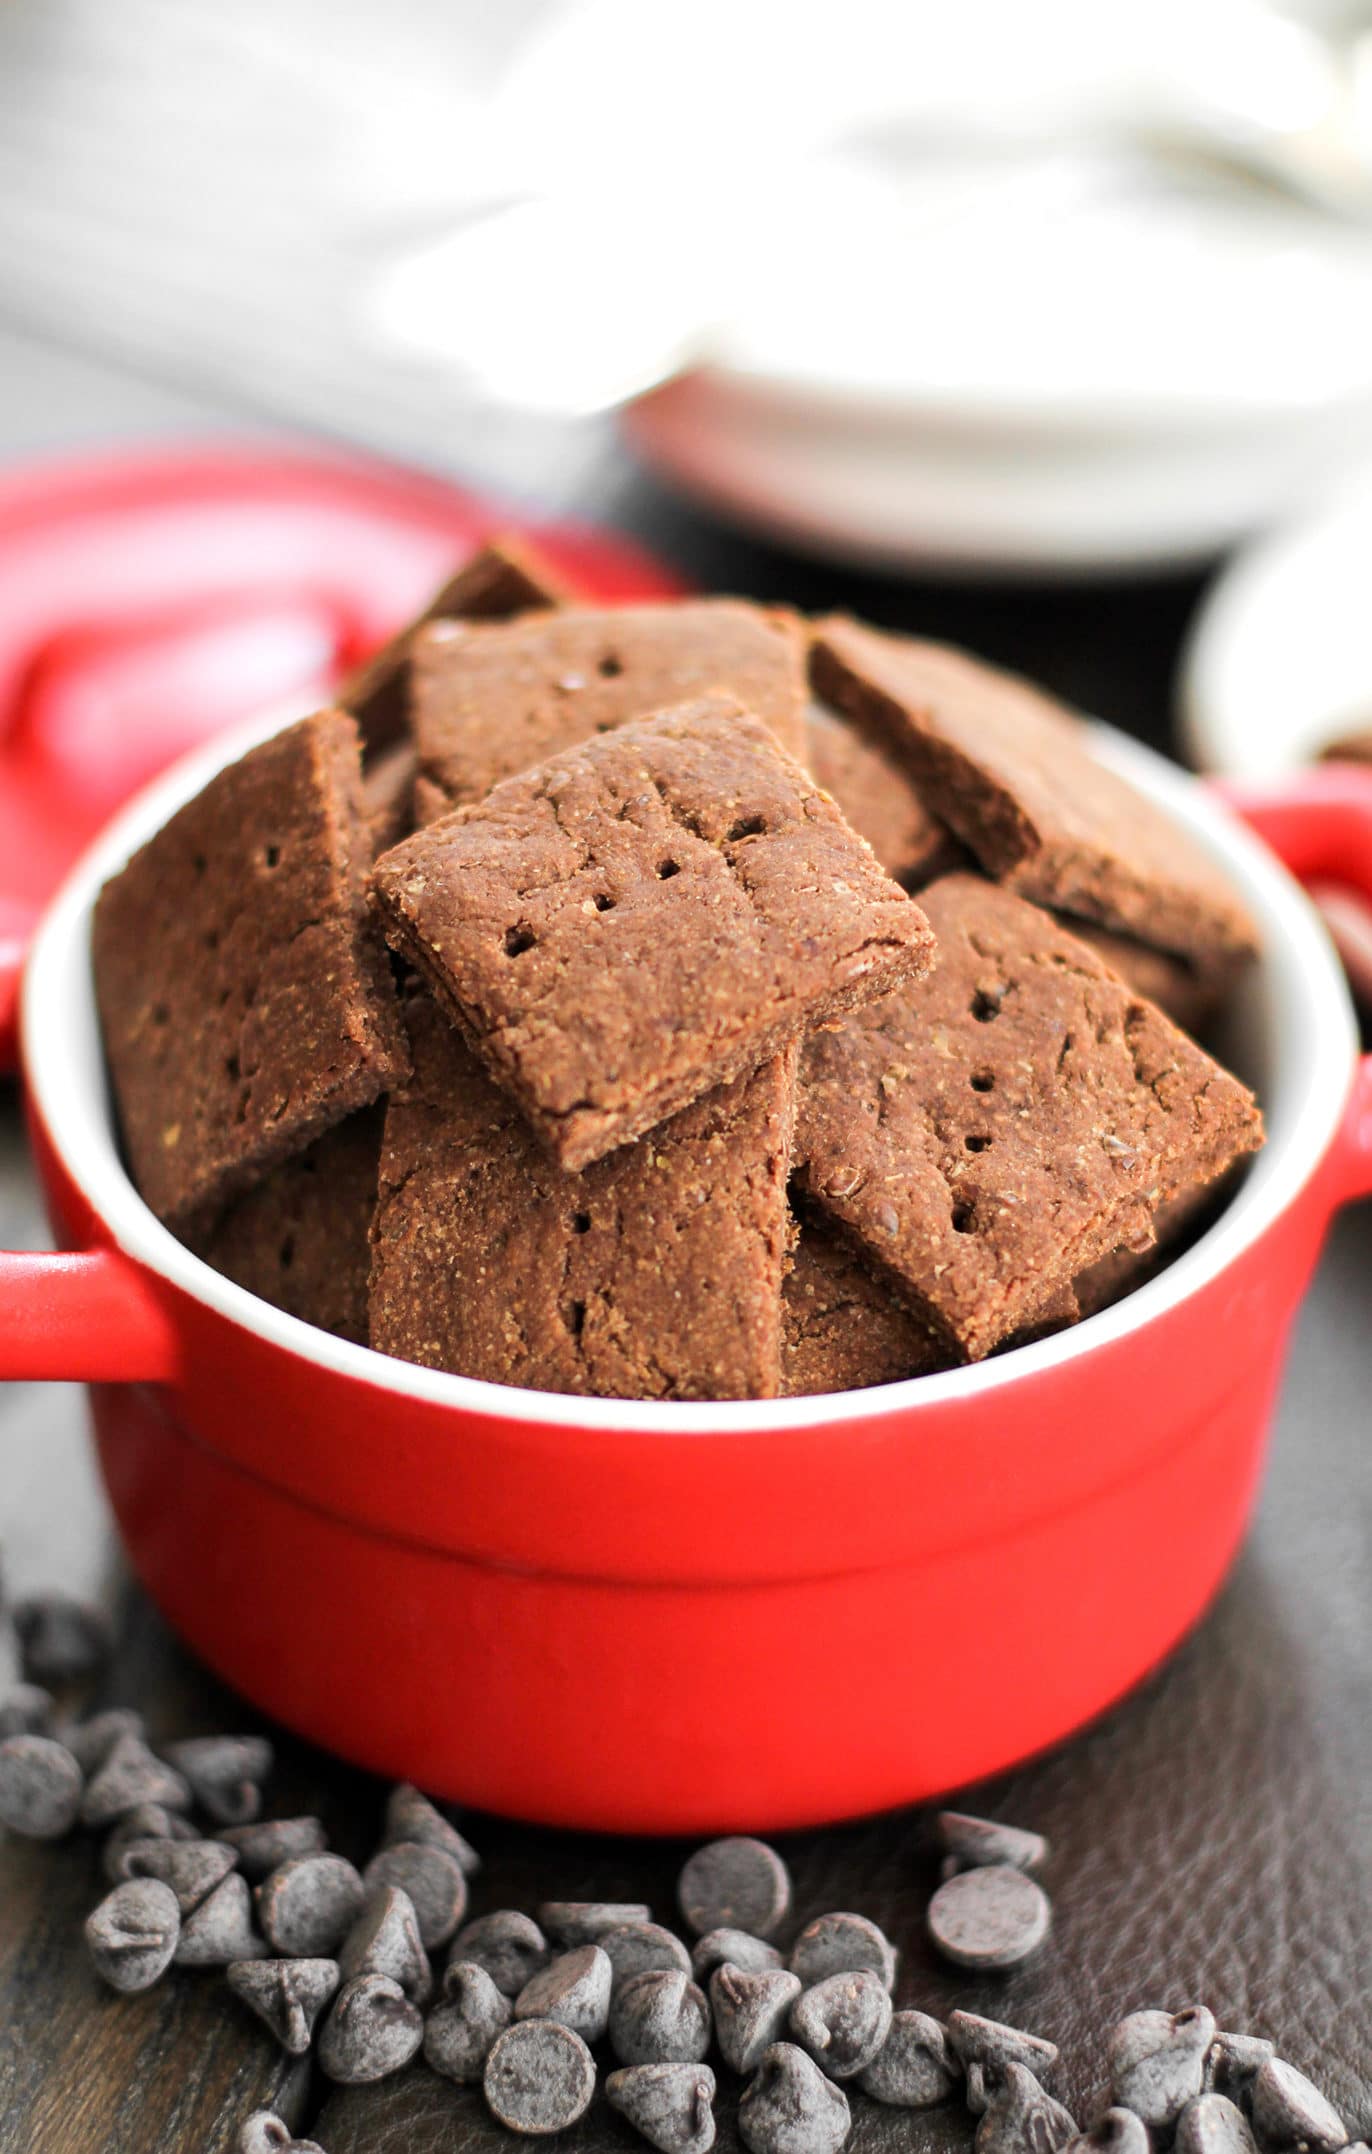 Healthy Chocolate Flax Crackers (refined sugar free, low fat, high protein, high fiber, gluten free, vegan) - Healthy Dessert Recipes at Desserts with Benefits